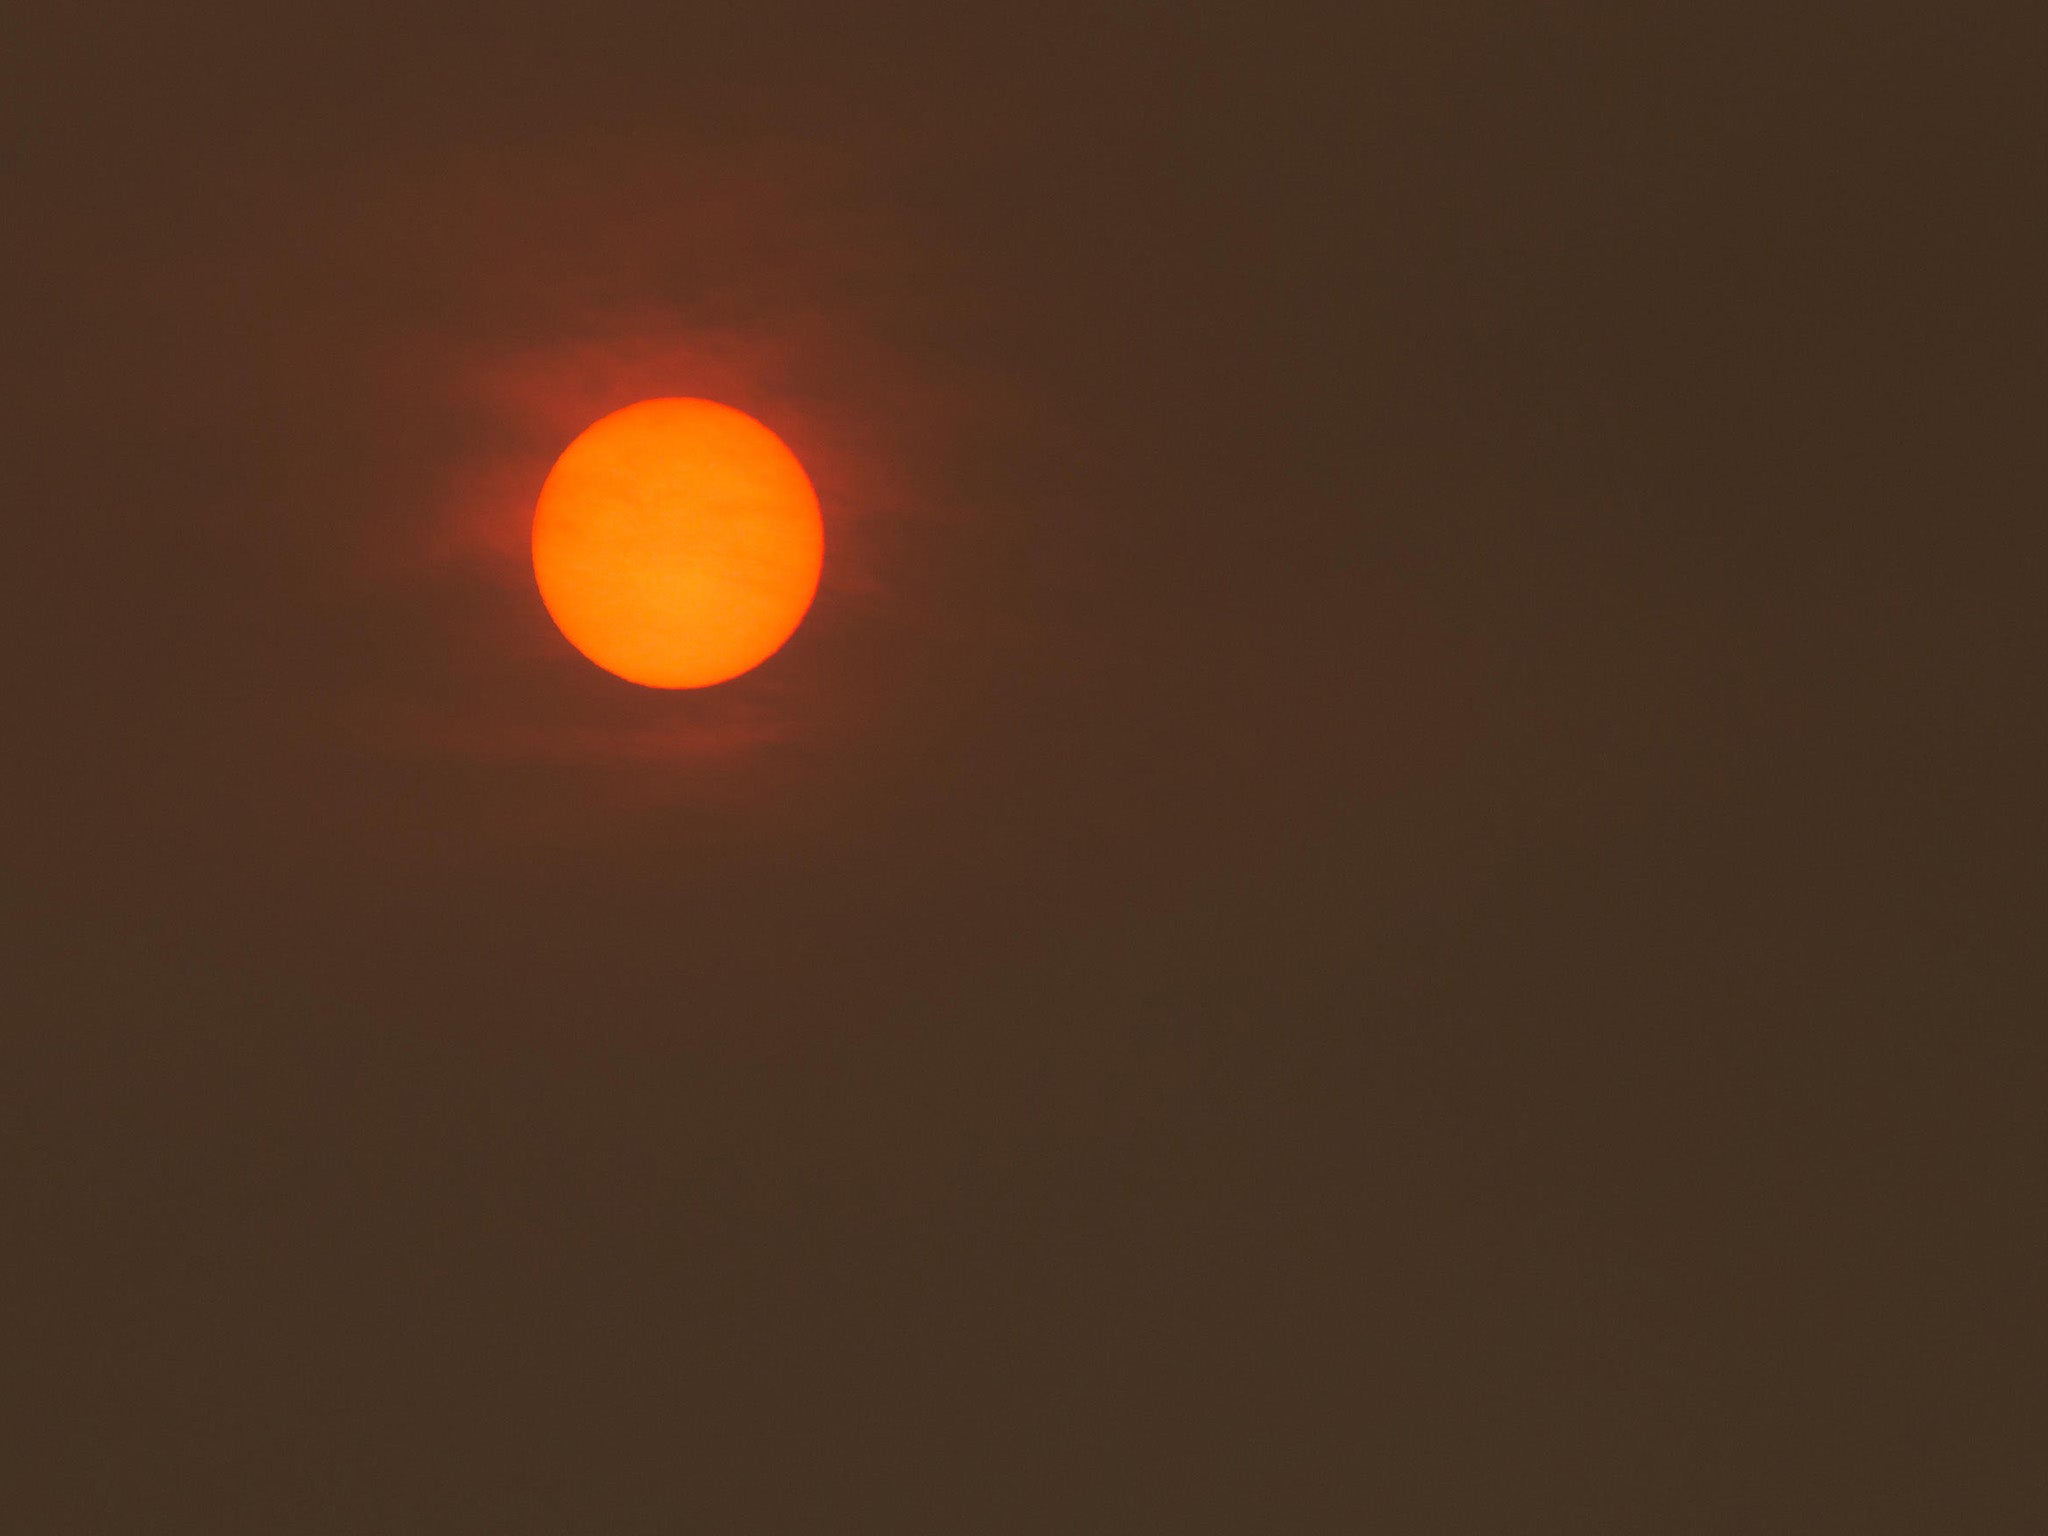 Red sun spotted in the sky over Bromsgrove in Worcestershire